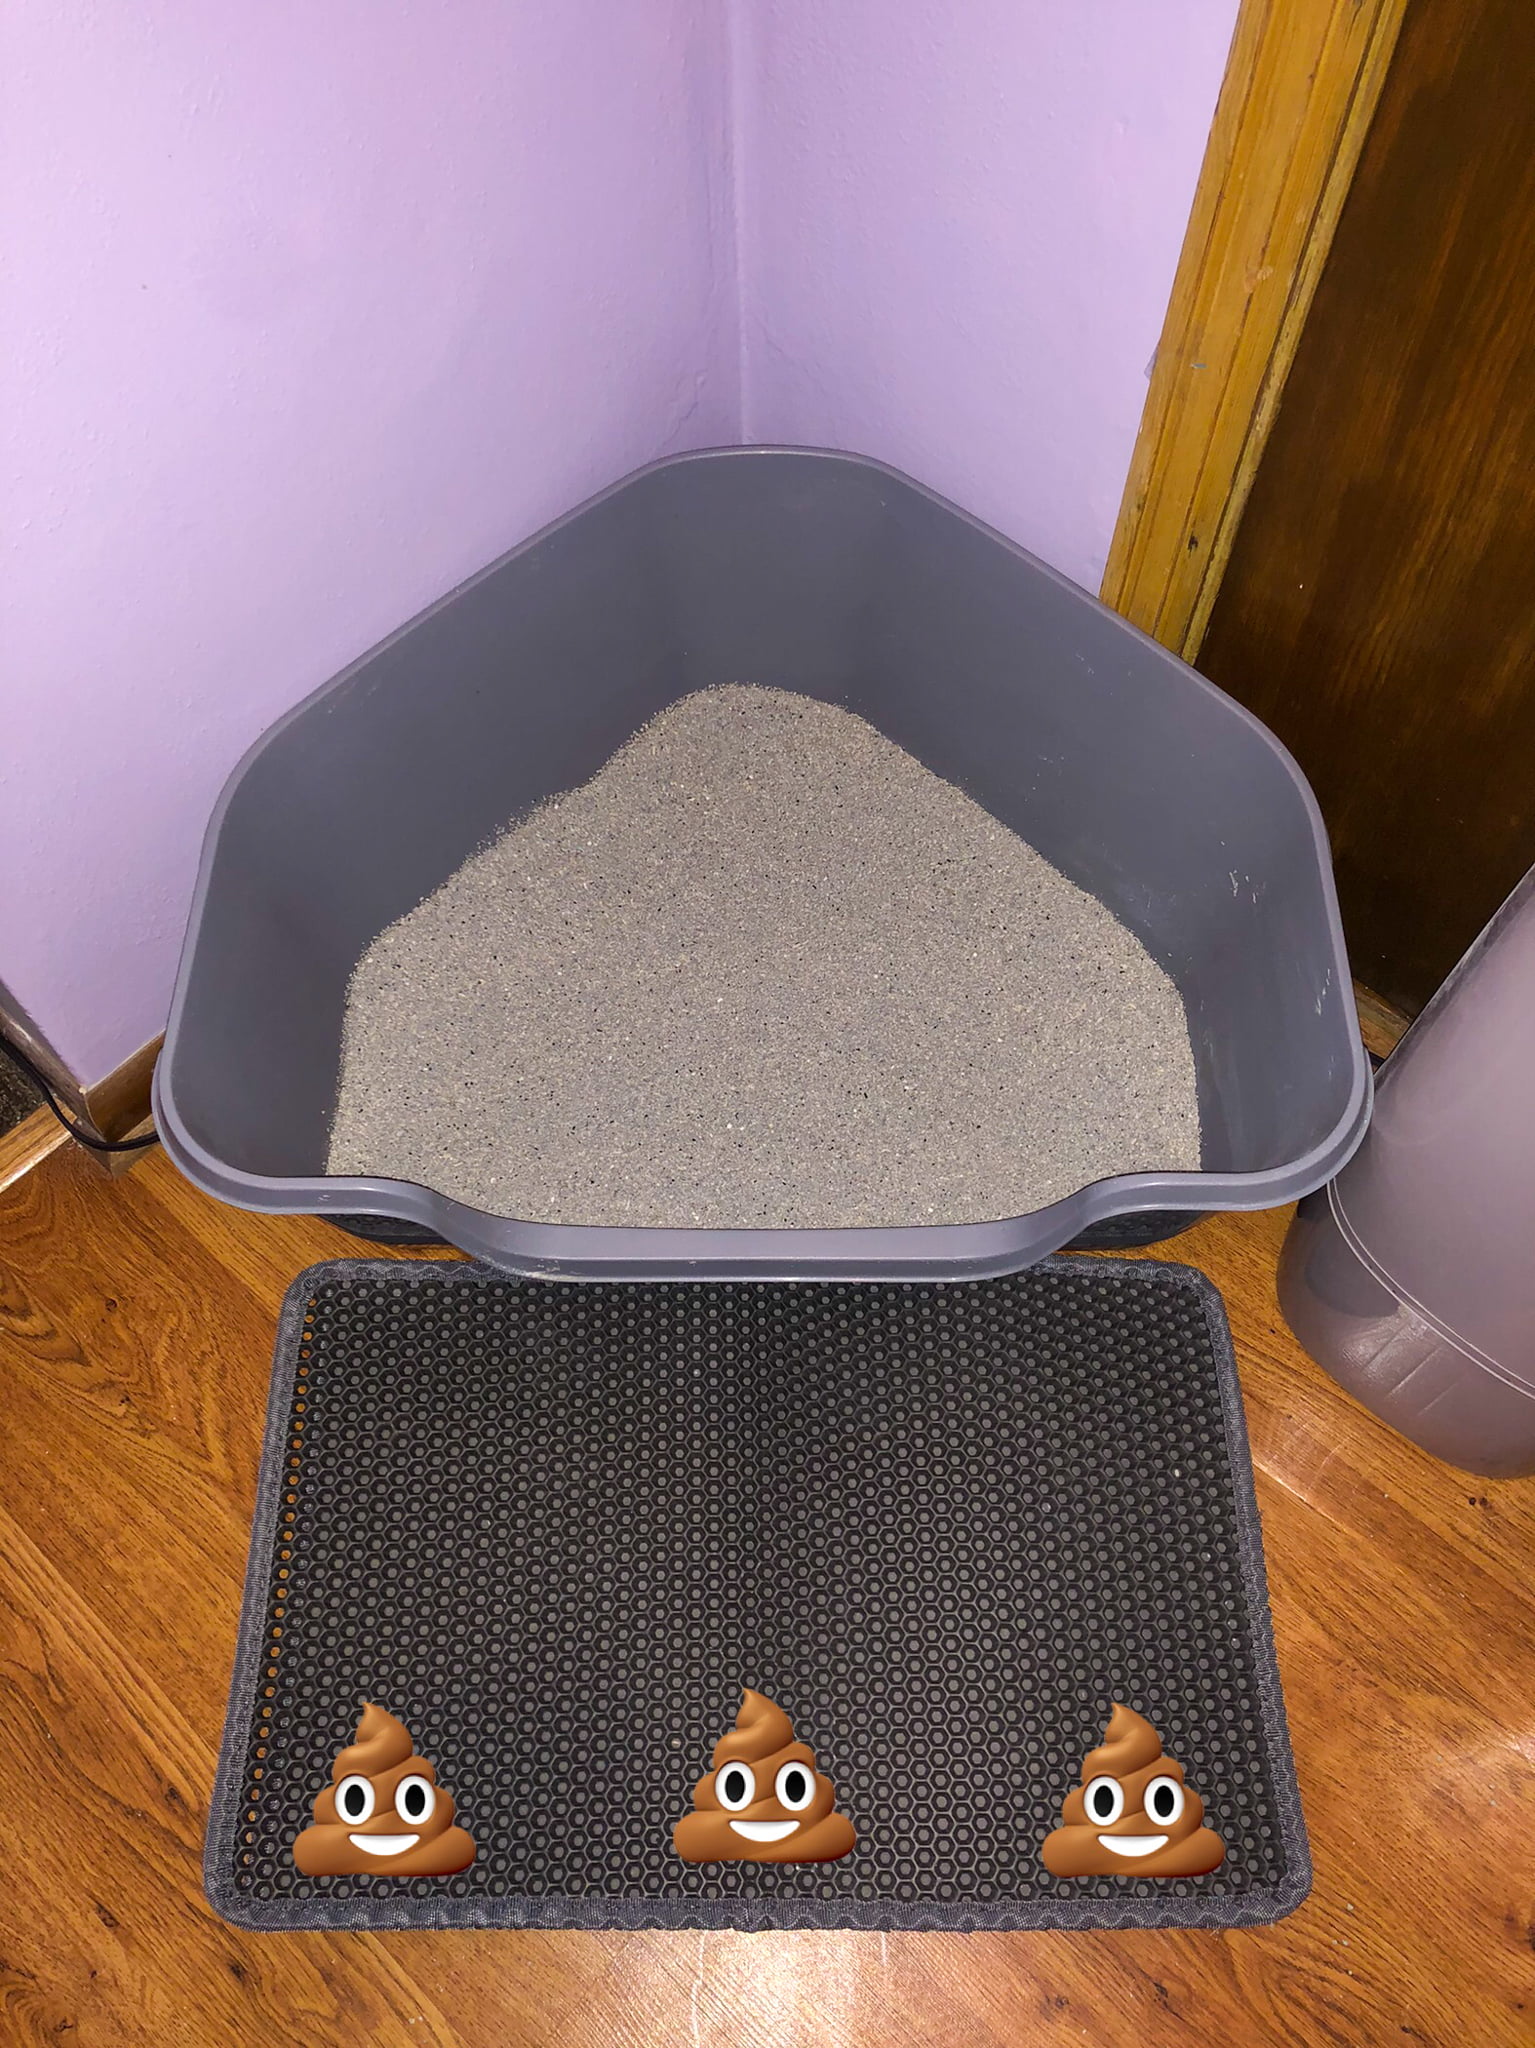 Poop emojis on the mat outside the litter box.